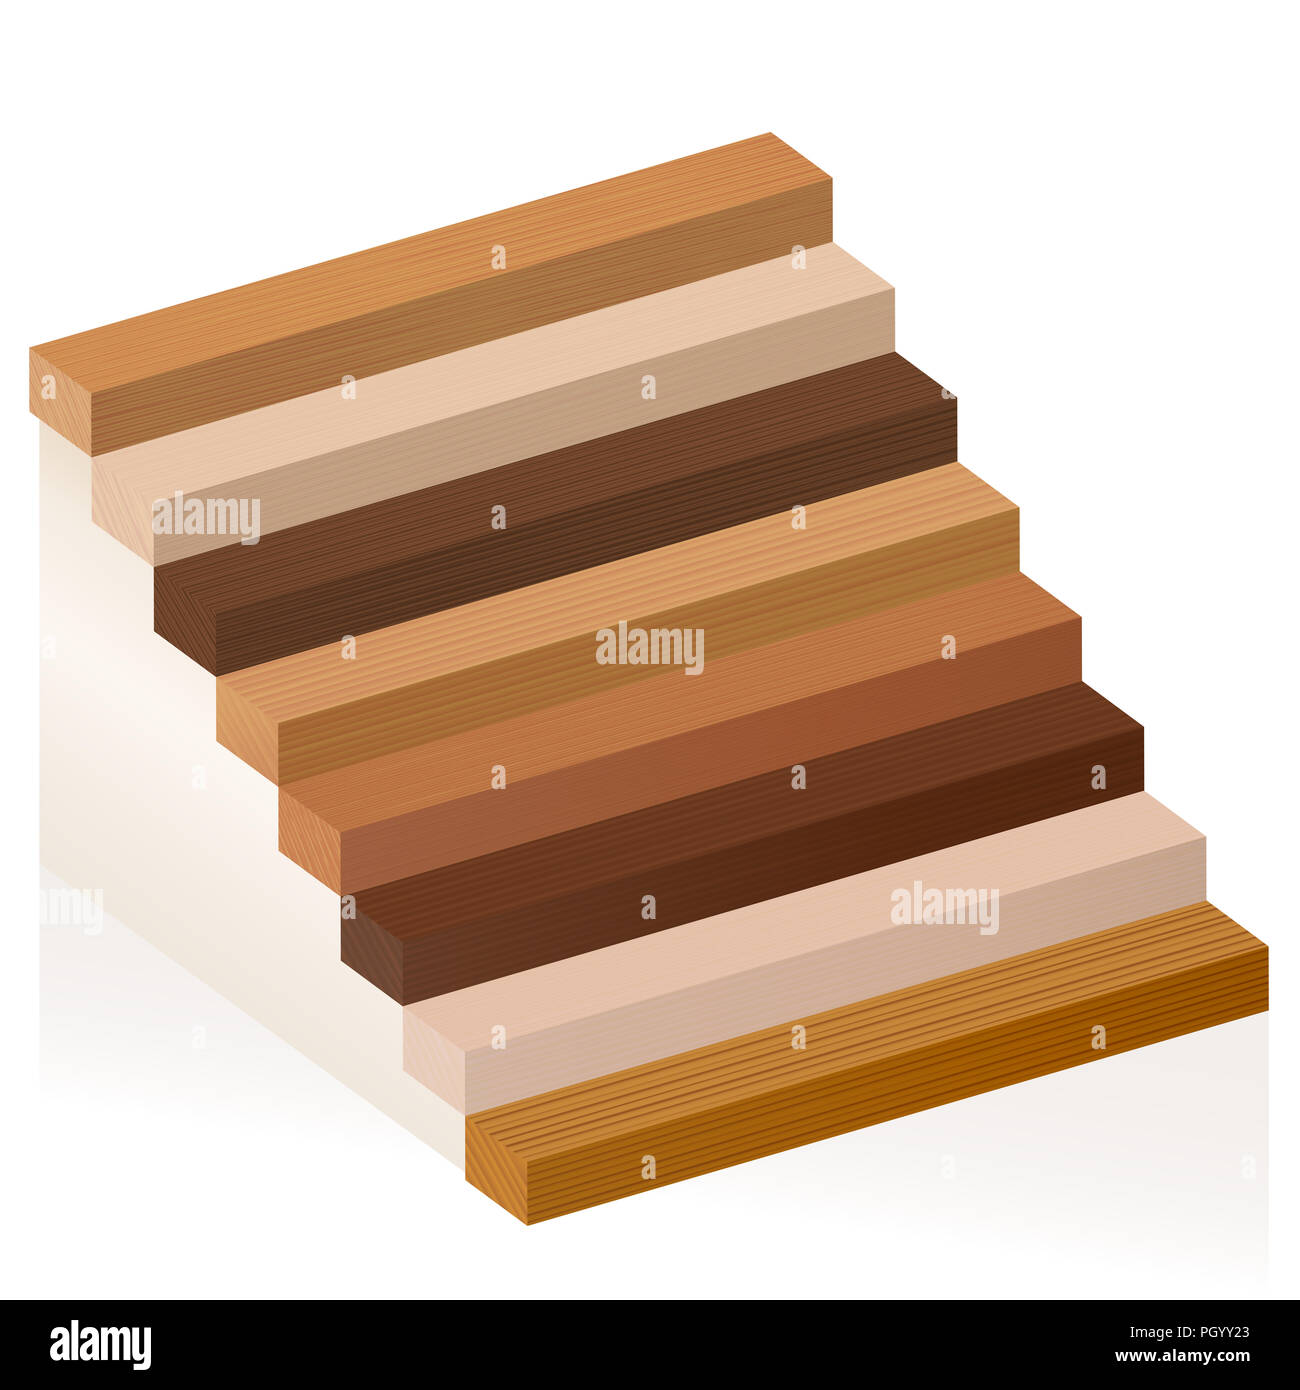 Wooden staircase - wood samples with different textures, colors, glazes, from various trees to choose - brown, dark, gray, light, red, yellow, orange. Stock Photo